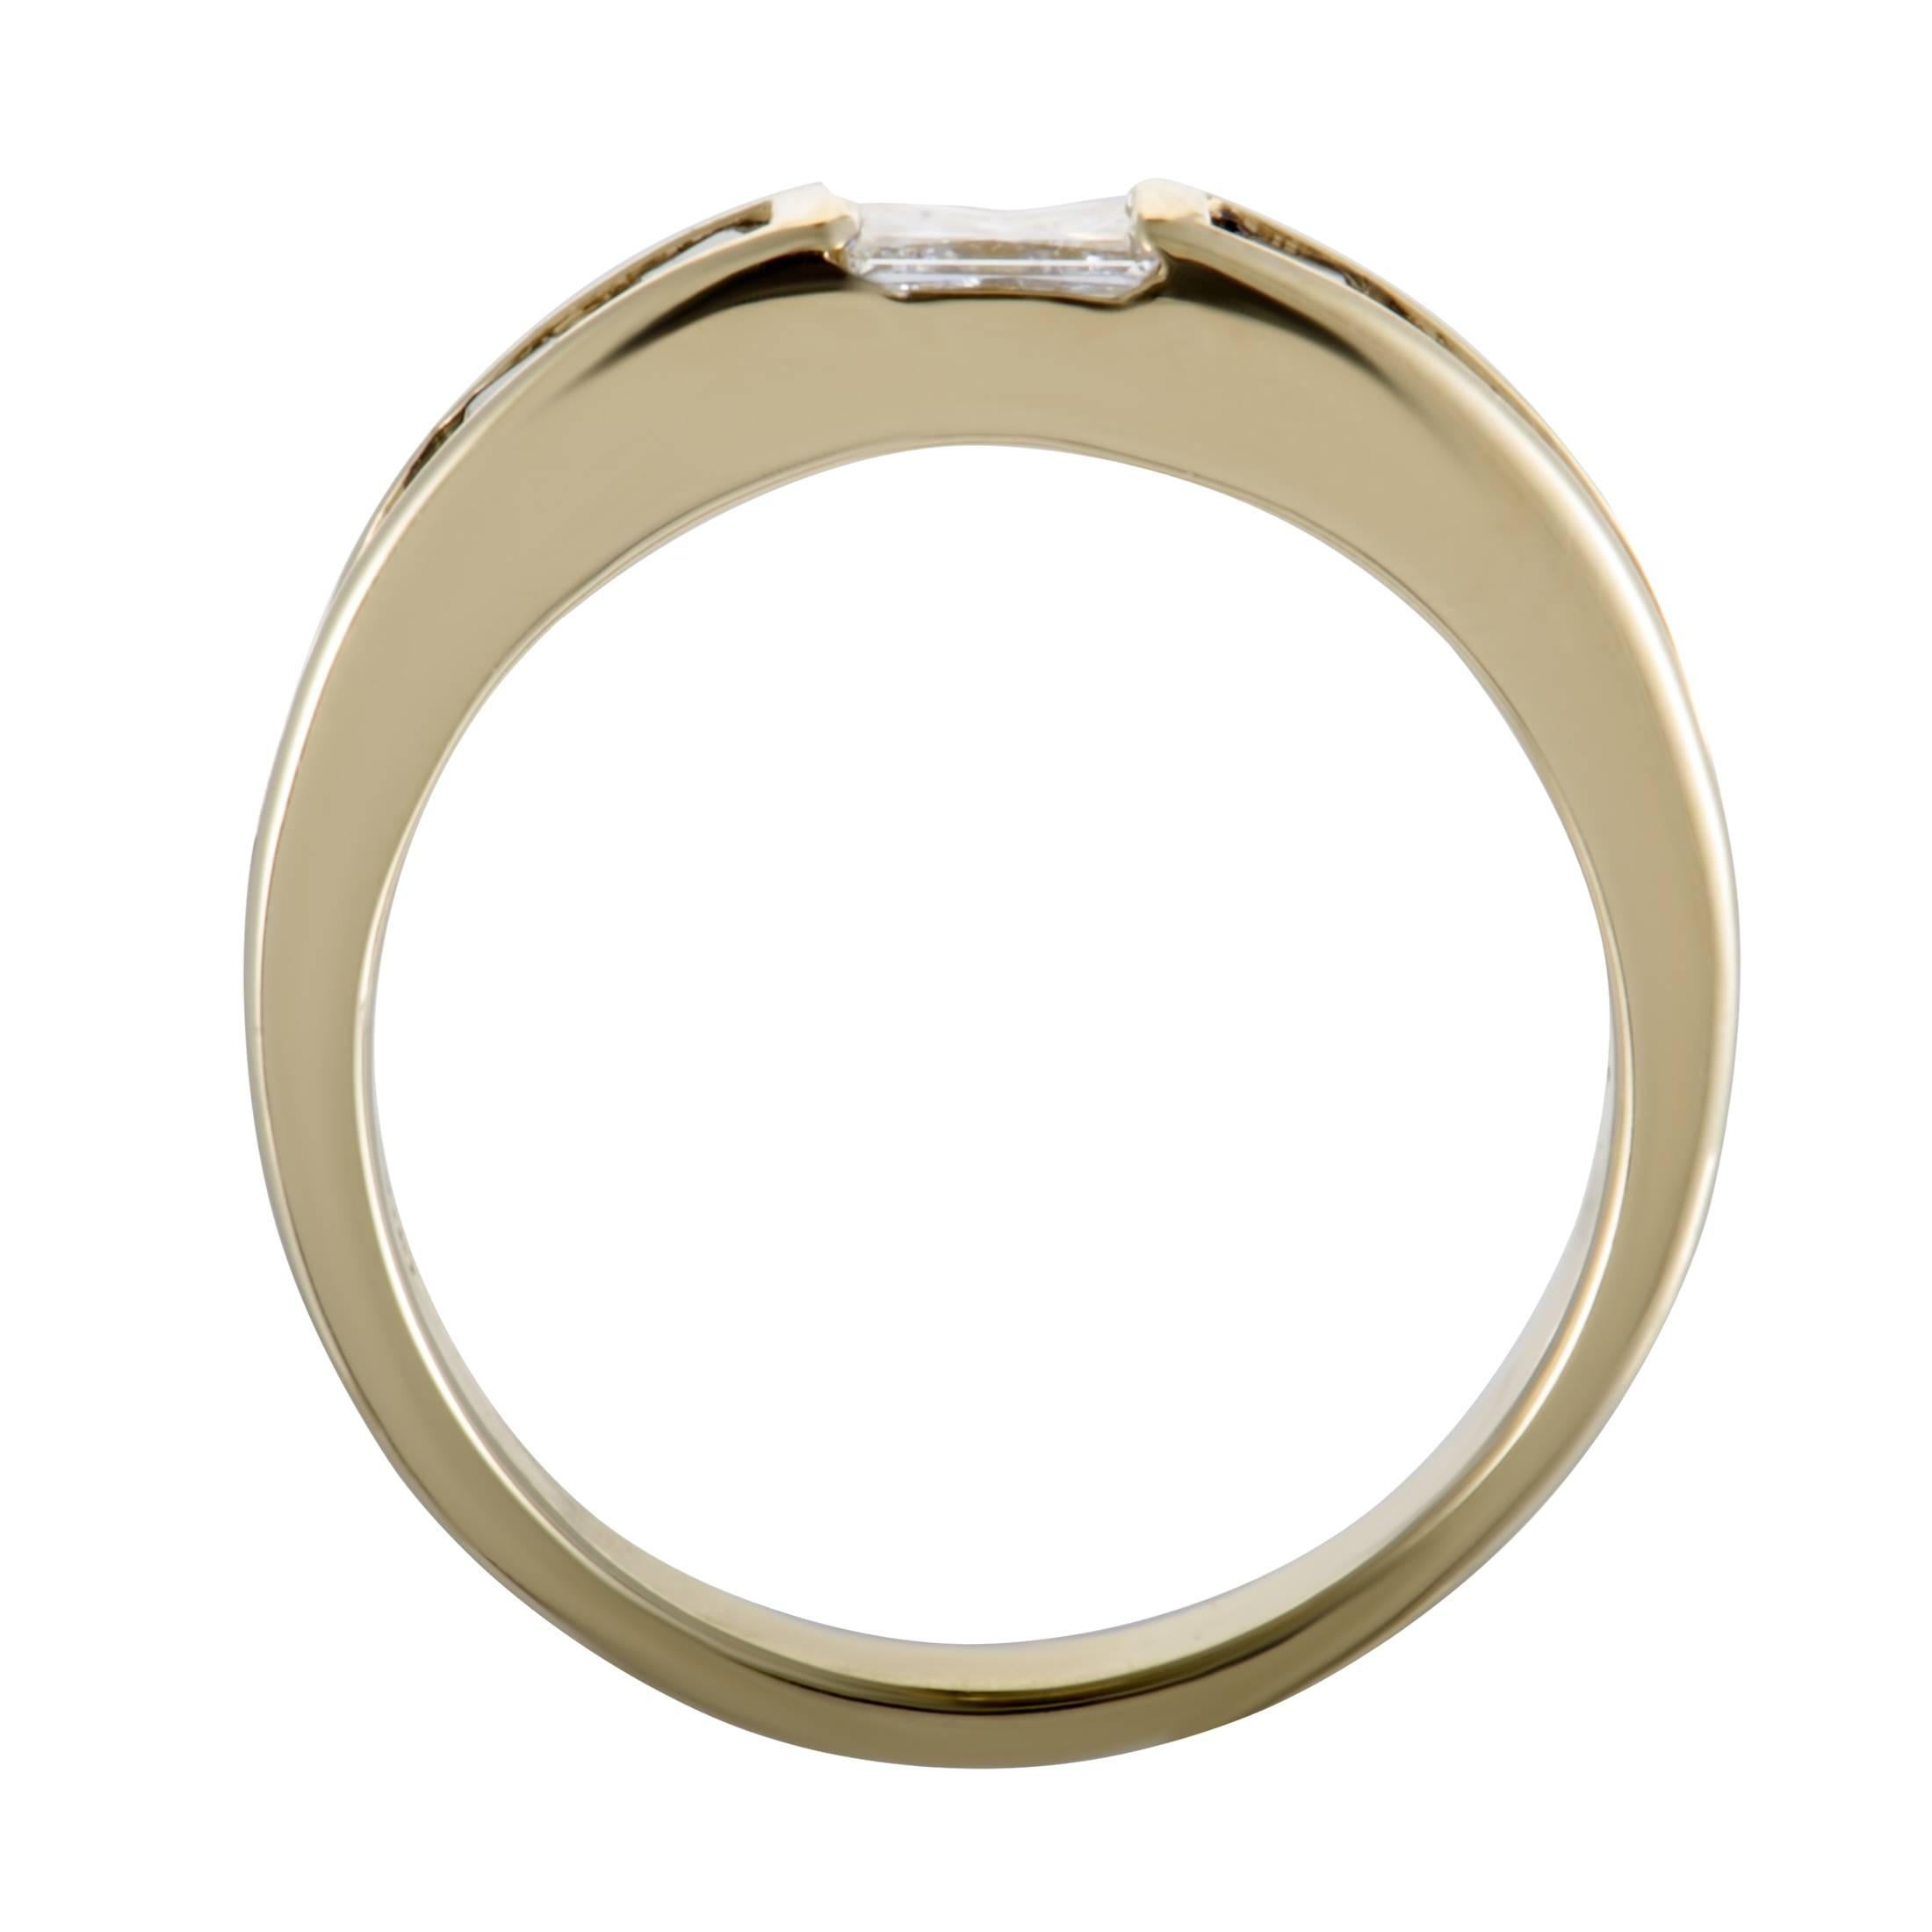 The refined, timelessly elegant allure of Tiffany & Co. pieces is visible in every aspect of this sublime band, from its splendidly classic design, to the tasteful décor that exudes class and prestige. The band is made of 18K yellow gold and boasts